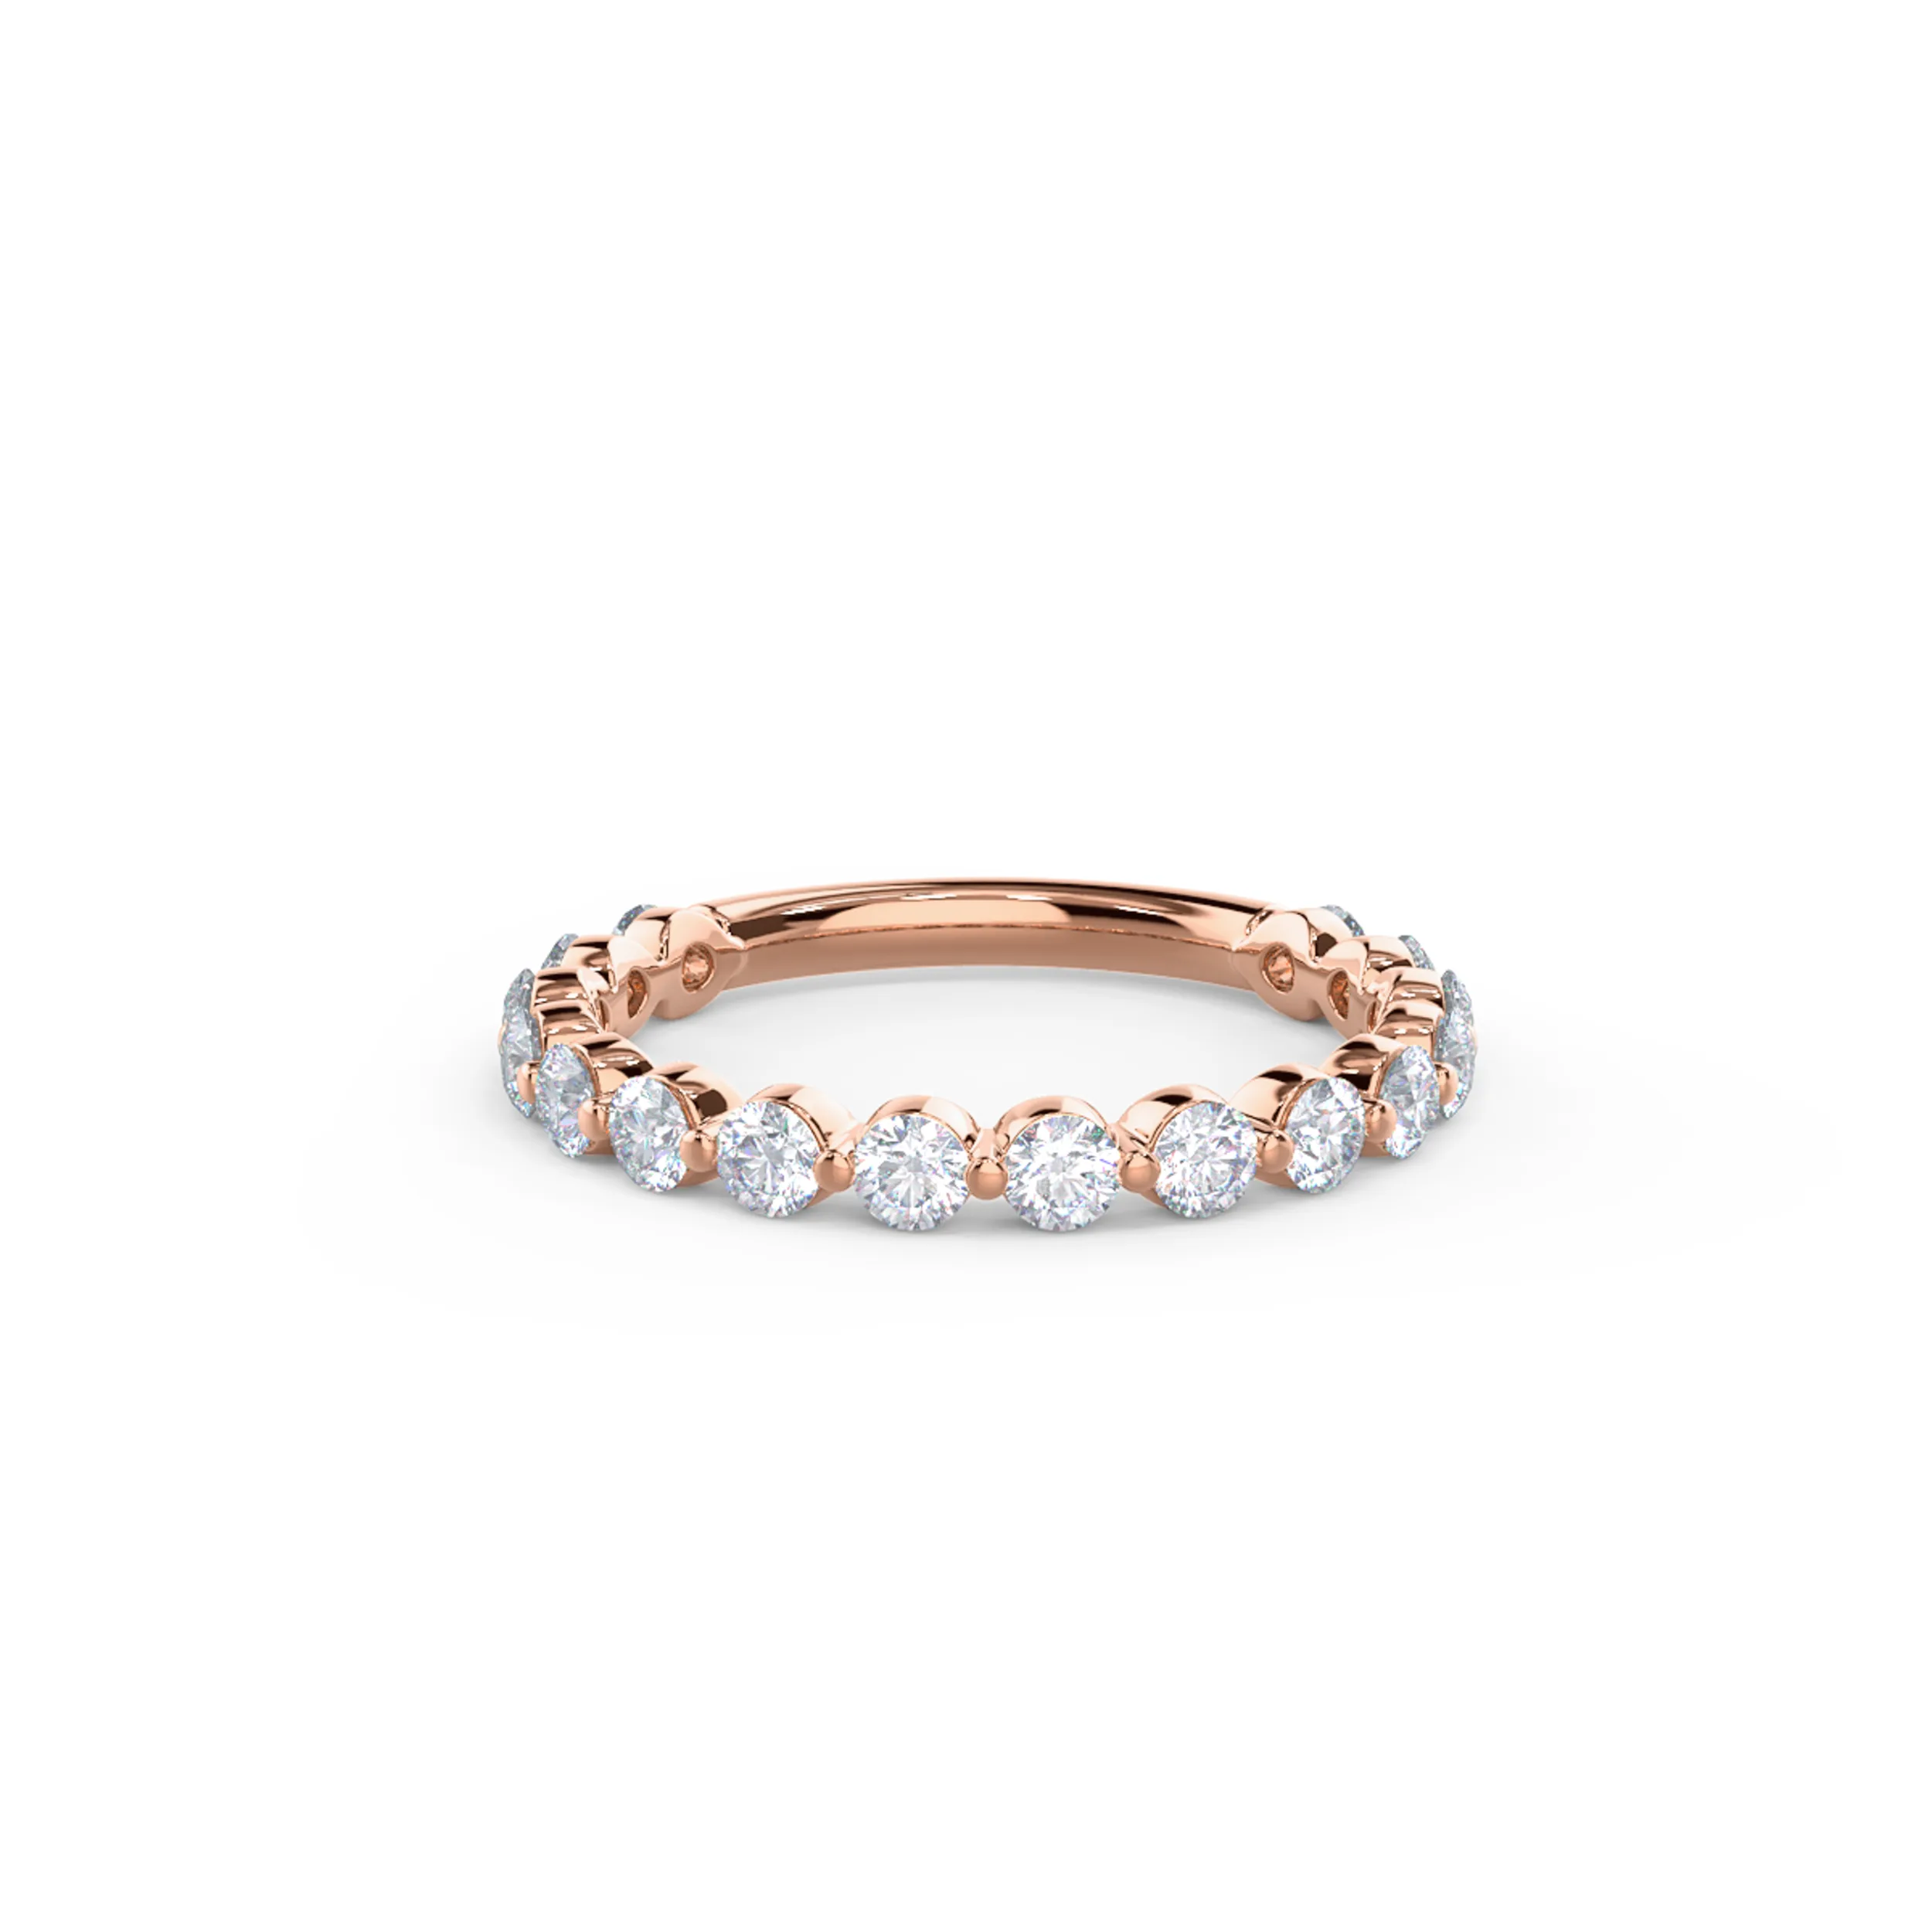 Rose Gold Shared Prong Three Quarter Band featuring High Quality 0.8 ctw Round Diamonds (Main View)